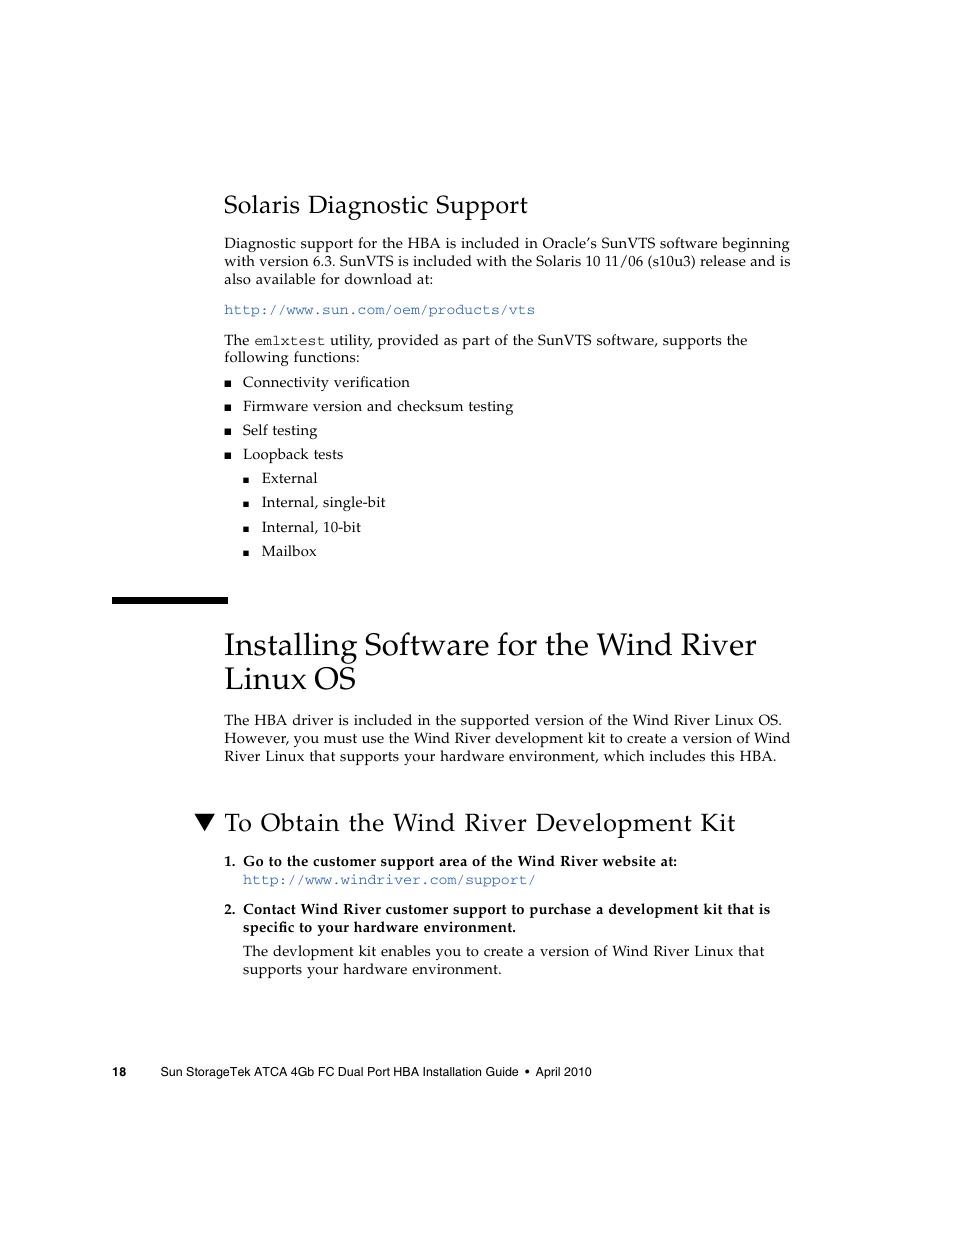 Solaris diagnostic support, Installing software for the wind river linux os, To obtain the wind river development kit | Oracle Audio Technologies Sun StorageTek ATCA 4Gb FC Dual Port HBA SG-XPCIE2FC-ATCA-Z User Manual | Page 24 / 48